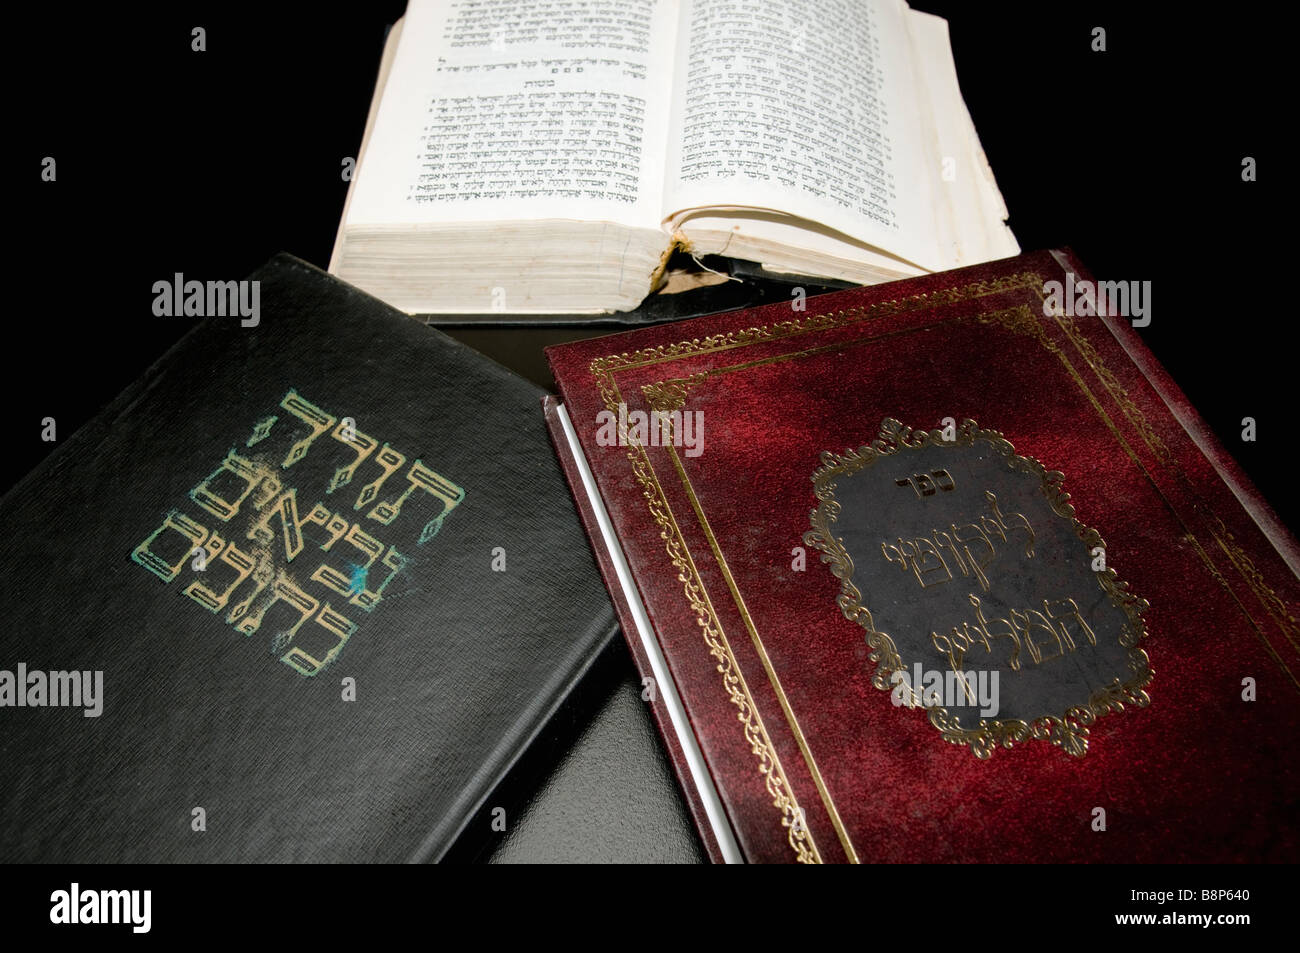 The Holy Bible and Jewish commentary literature Stock Photo